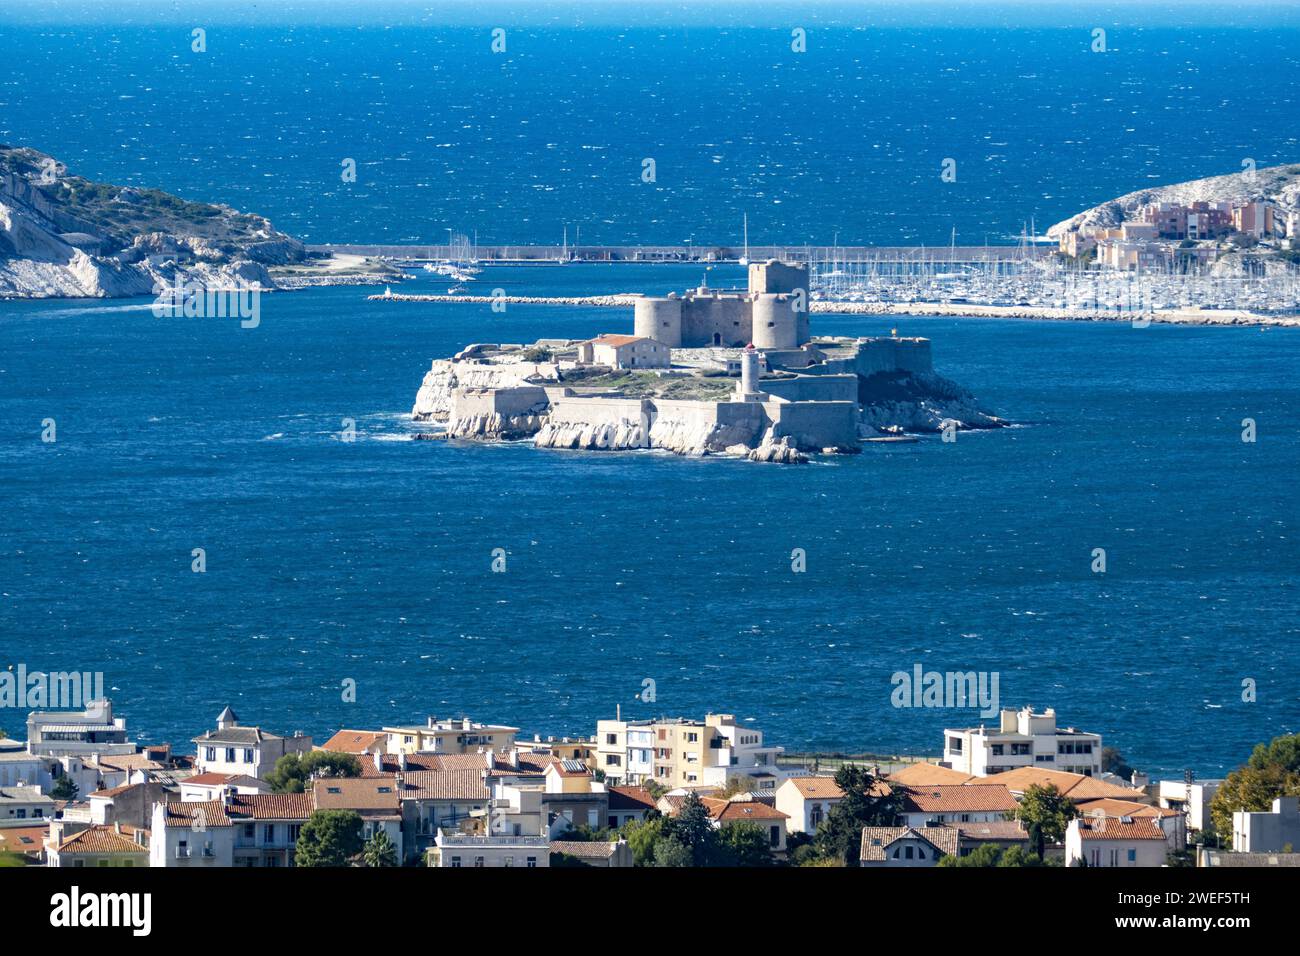 An aerial view of teh Chateau d'If, the iconic fortress in Marseille, France Stock Photo